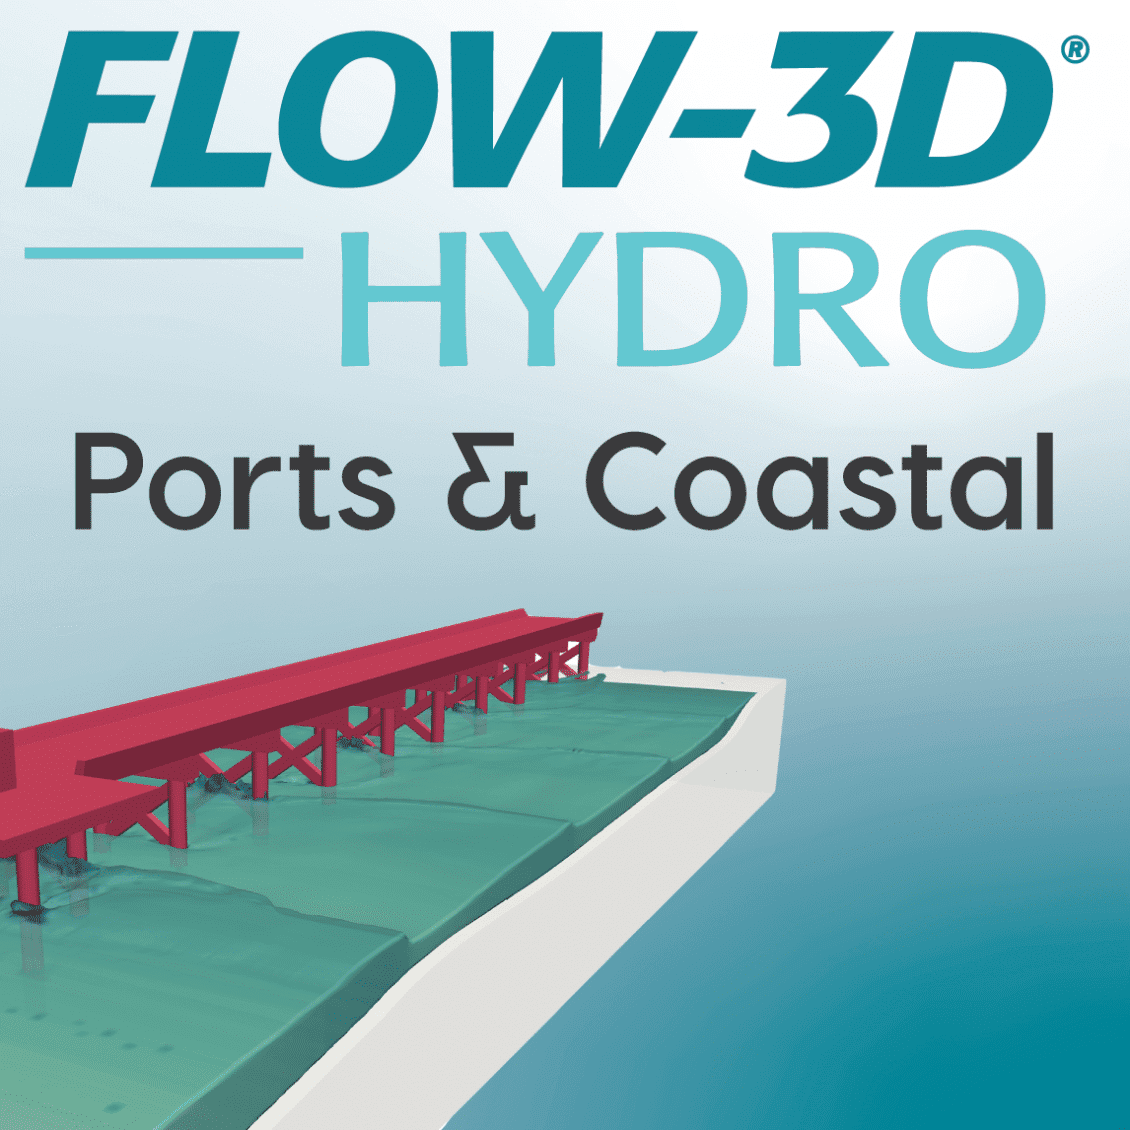 Product Ports and Coastal - FLOW-3D HYDRO | CFD Modeling Solution image